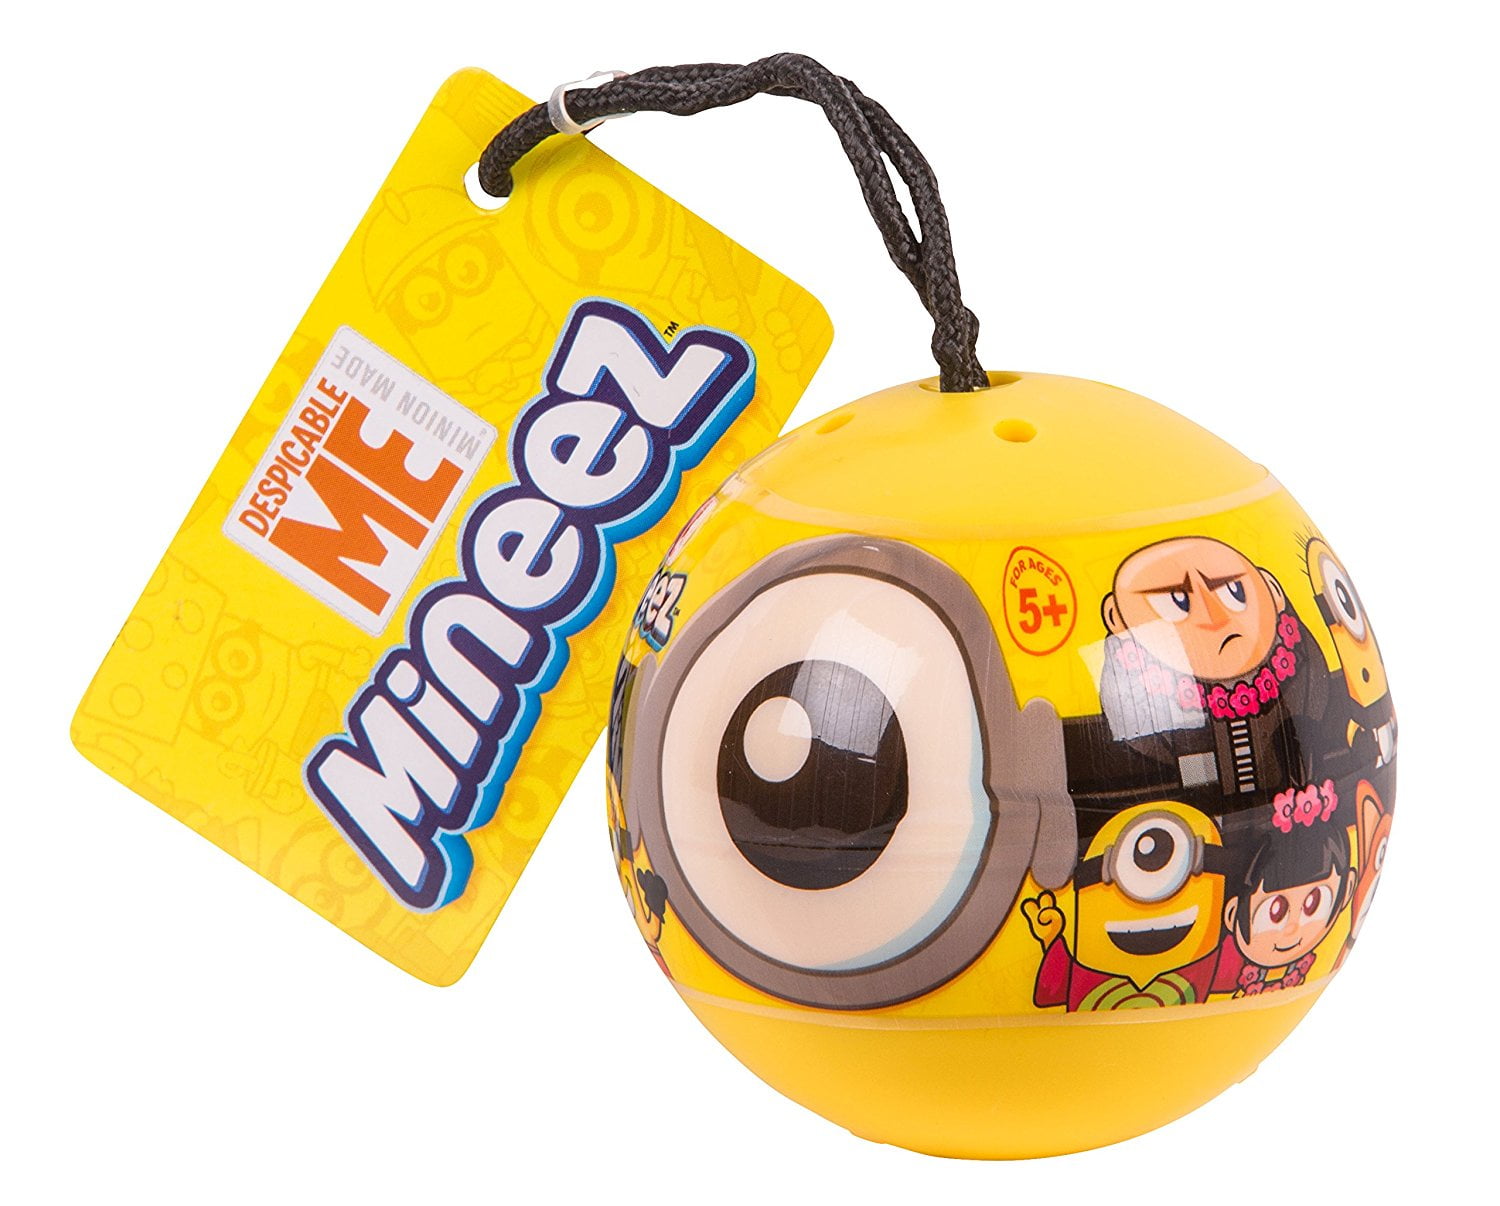 New Despicable Me 3 Minions Blind Bags Mystery Mini Figures 10-PK DELIVERY FREE 